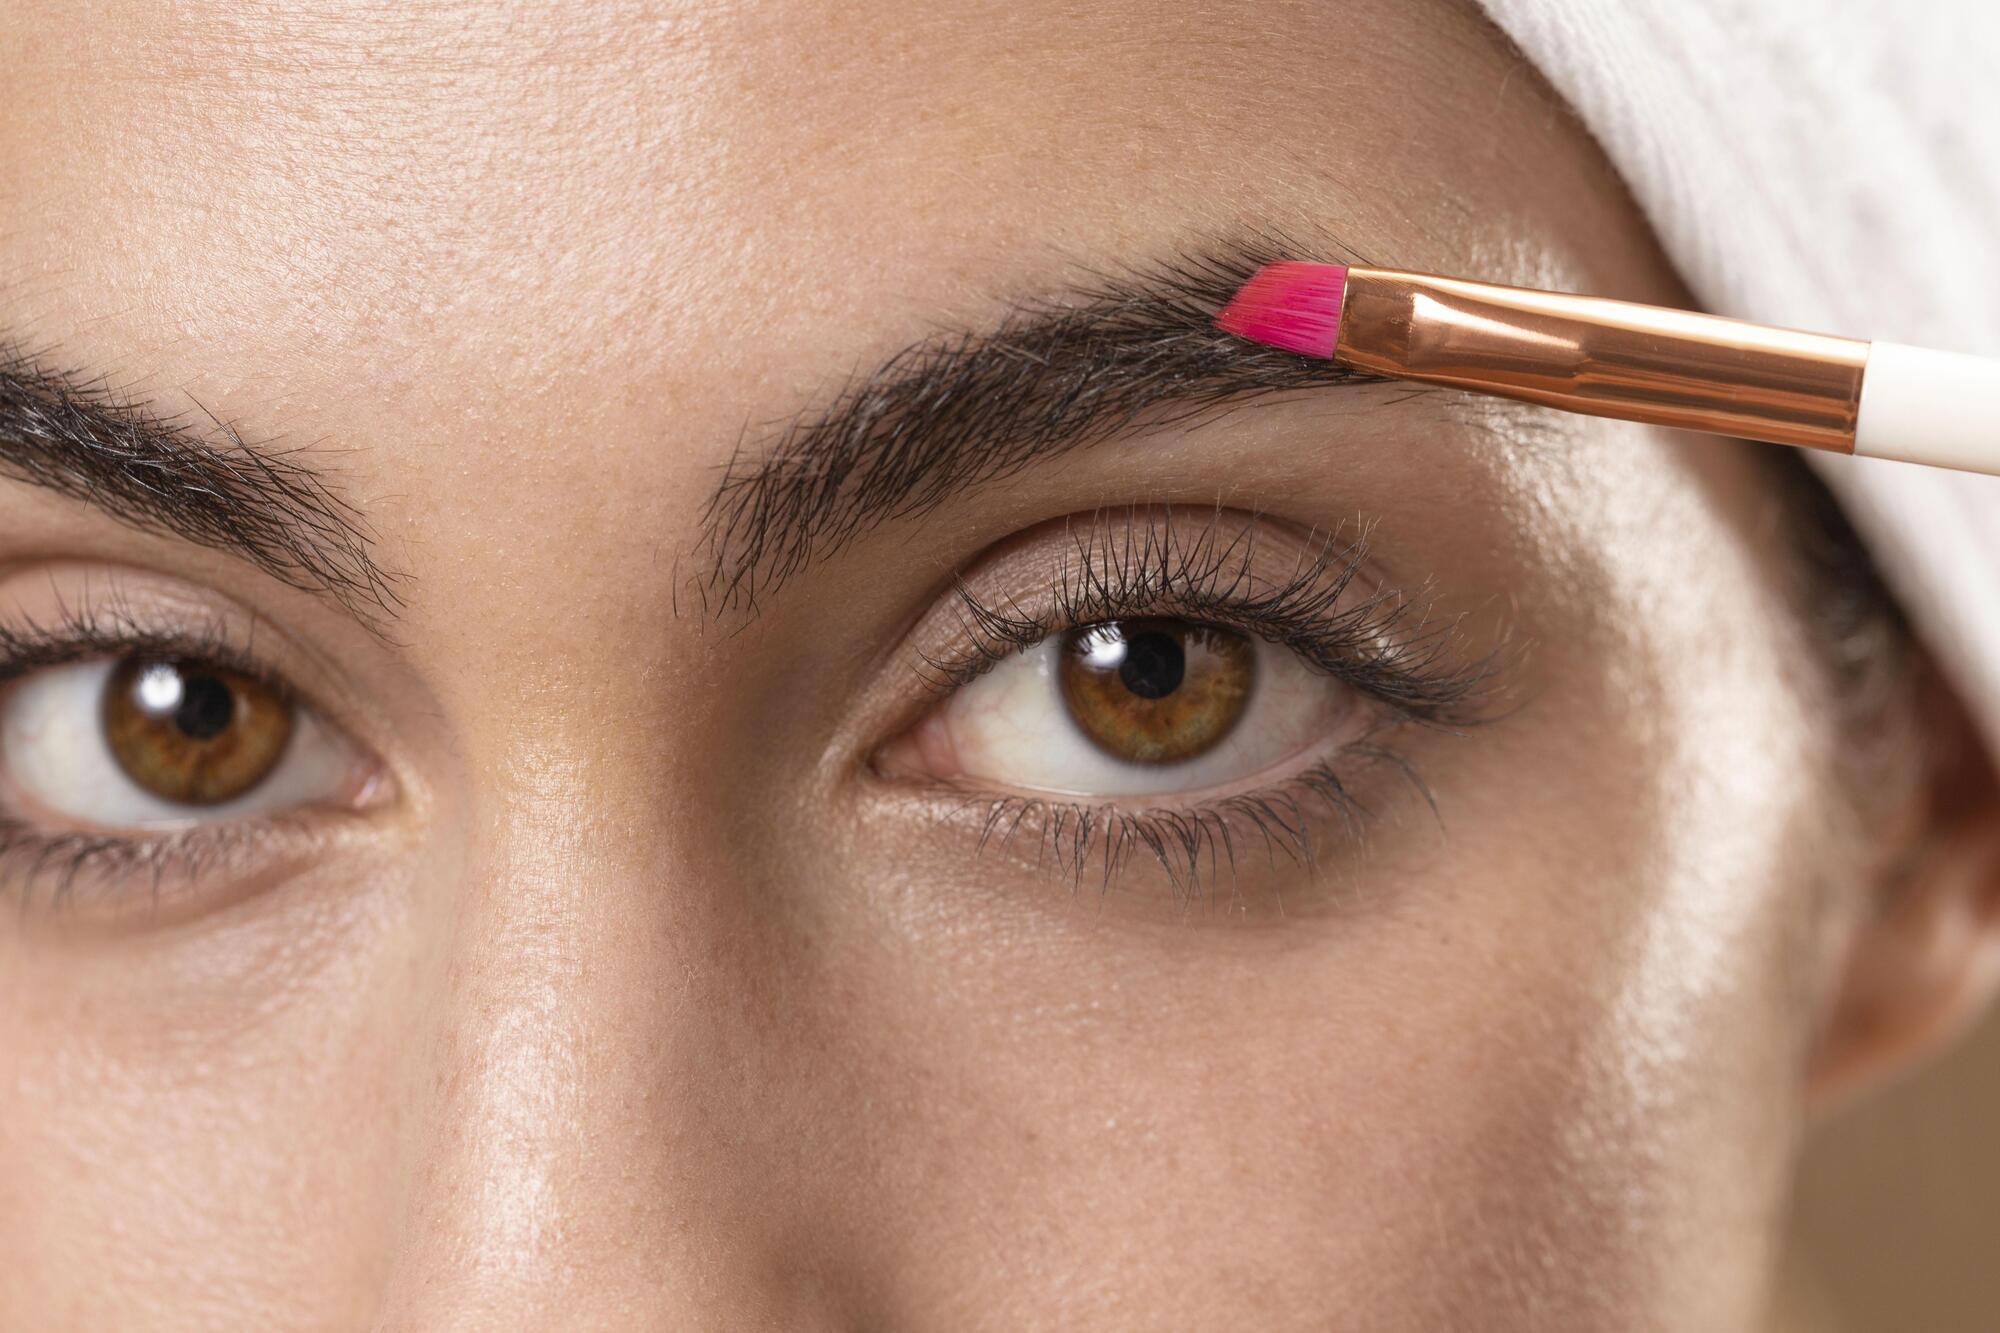 How to save money and get perfect eyebrows without a salon: life hack